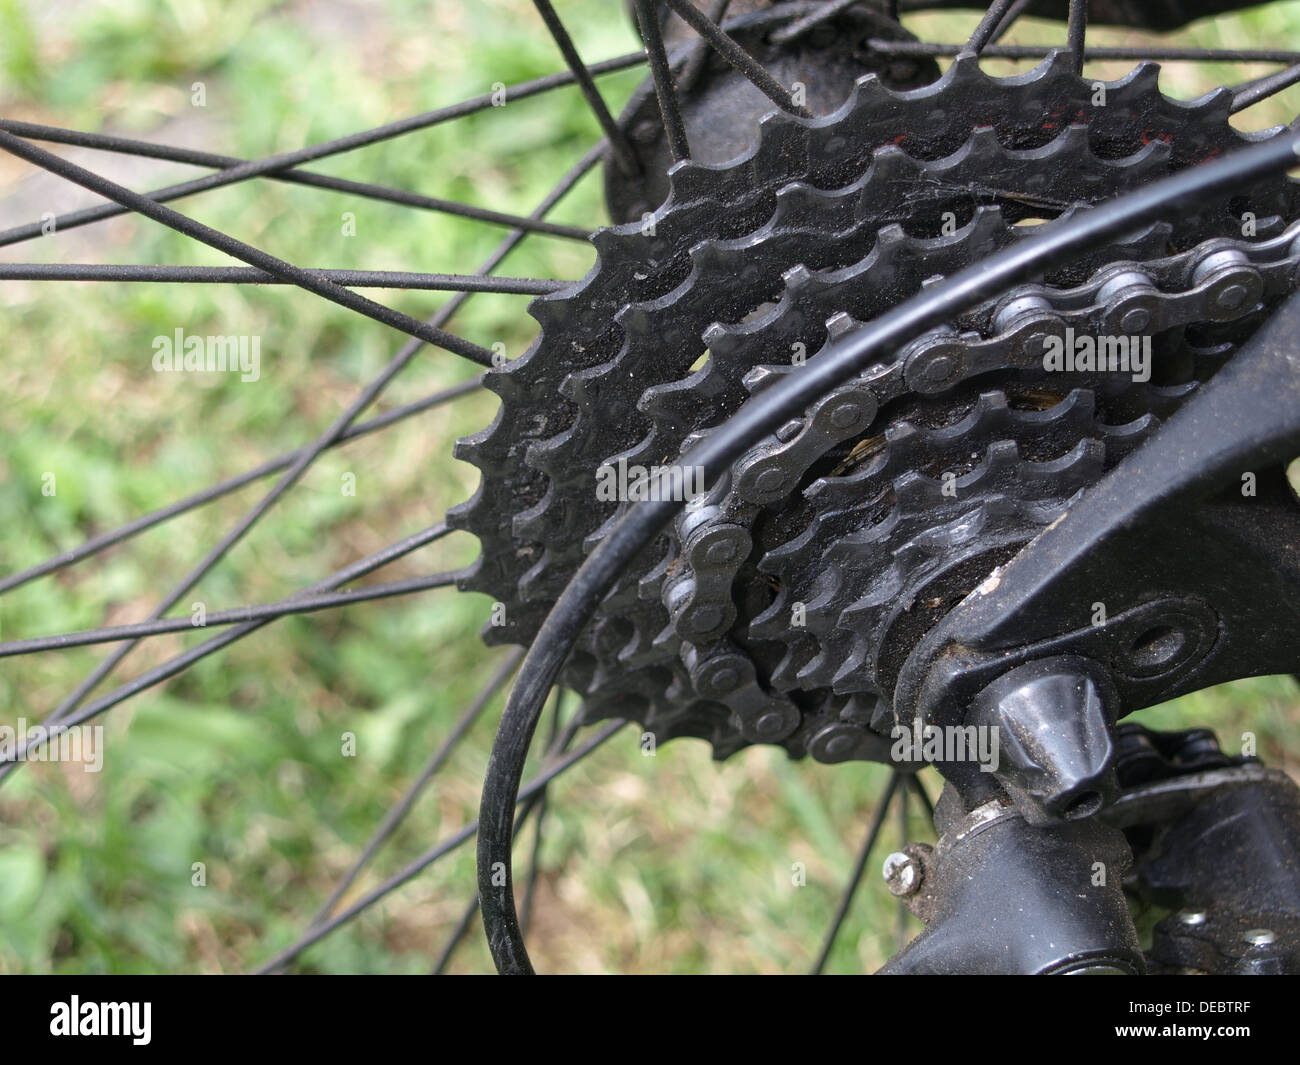 Hub gear hi-res - stock Alamy photography images and